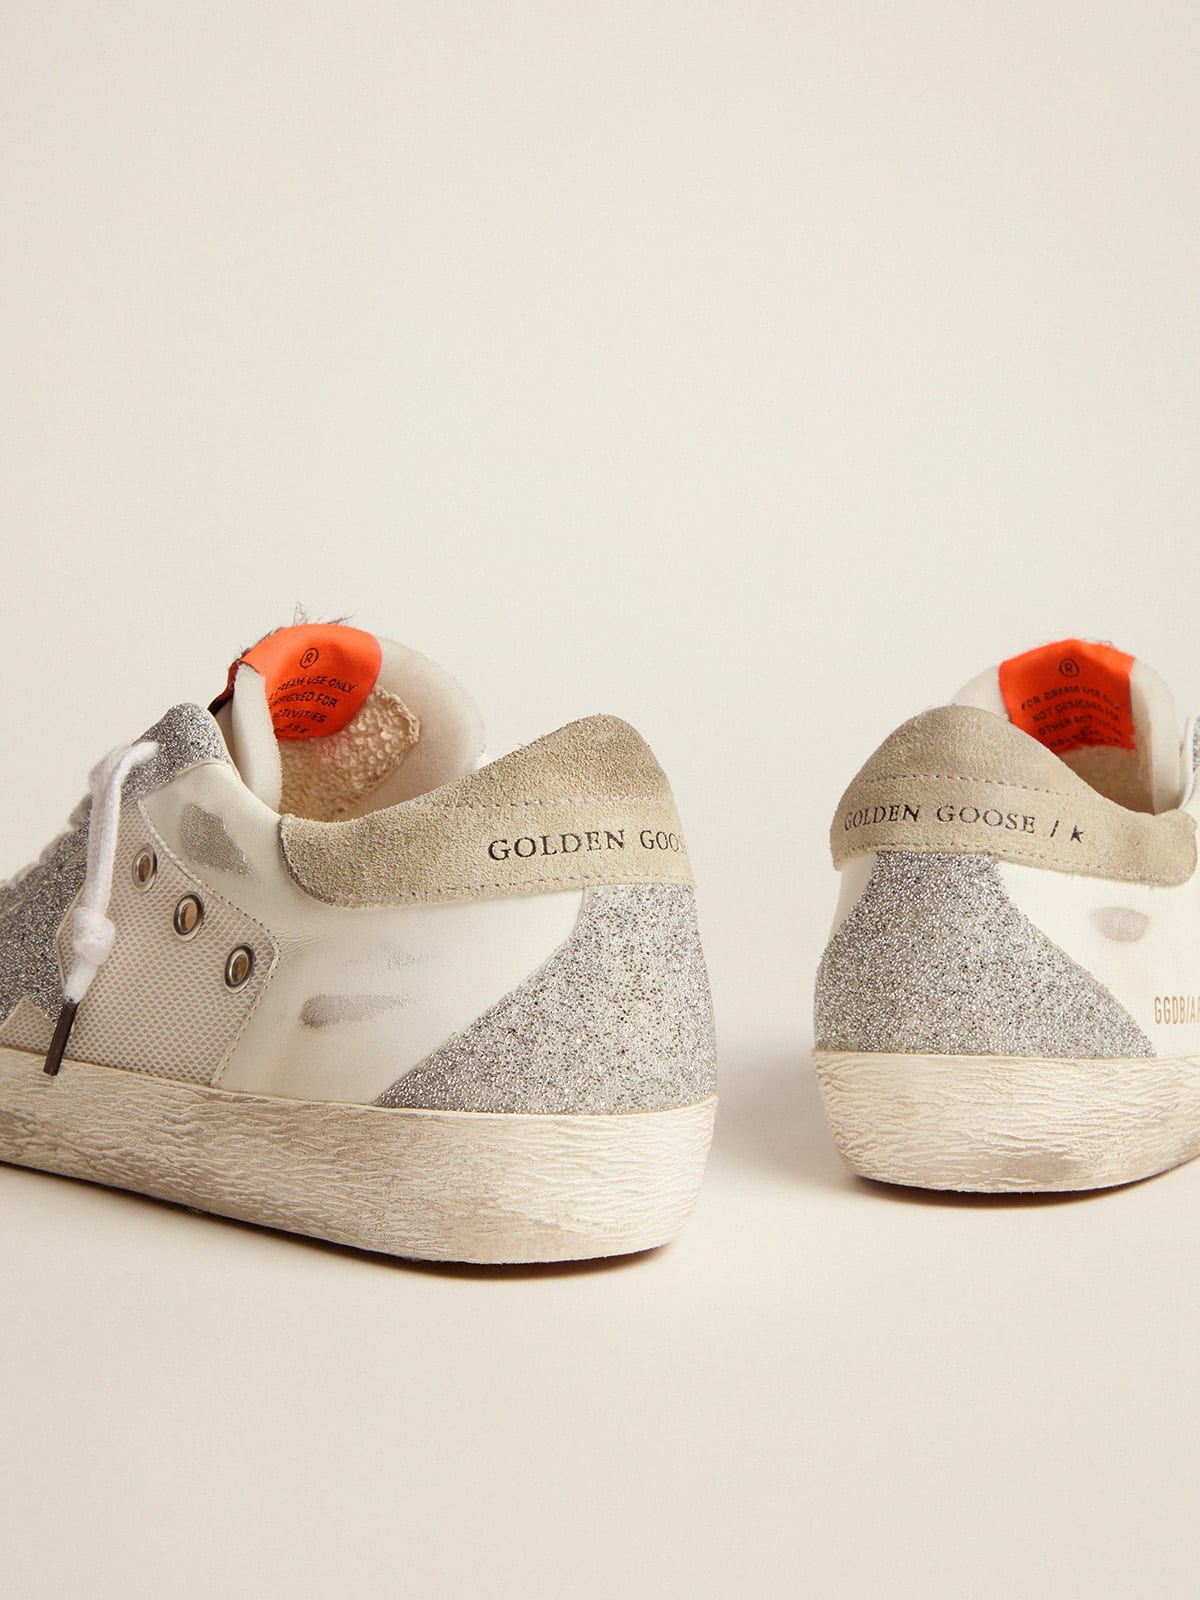 Golden Goose - Super-Star LTD in white leather and mesh with star and inserts in silver Swarovski micro-crystals in 